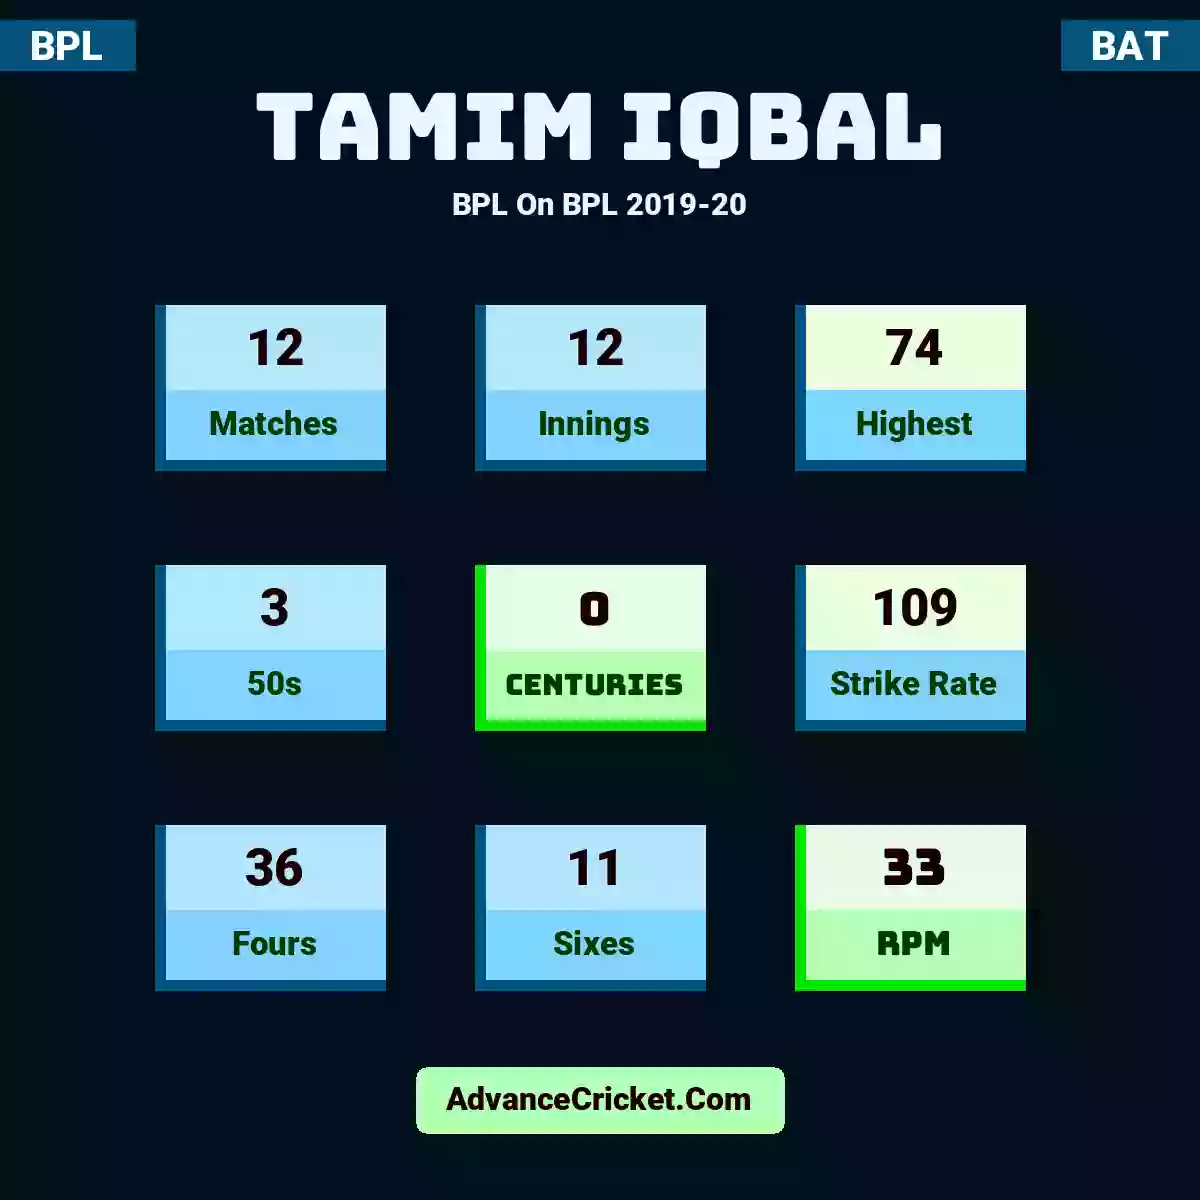 Tamim Iqbal BPL  On BPL 2019-20, Tamim Iqbal played 12 matches, scored 74 runs as highest, 3 half-centuries, and 0 centuries, with a strike rate of 109. T.Iqbal hit 36 fours and 11 sixes, with an RPM of 33.